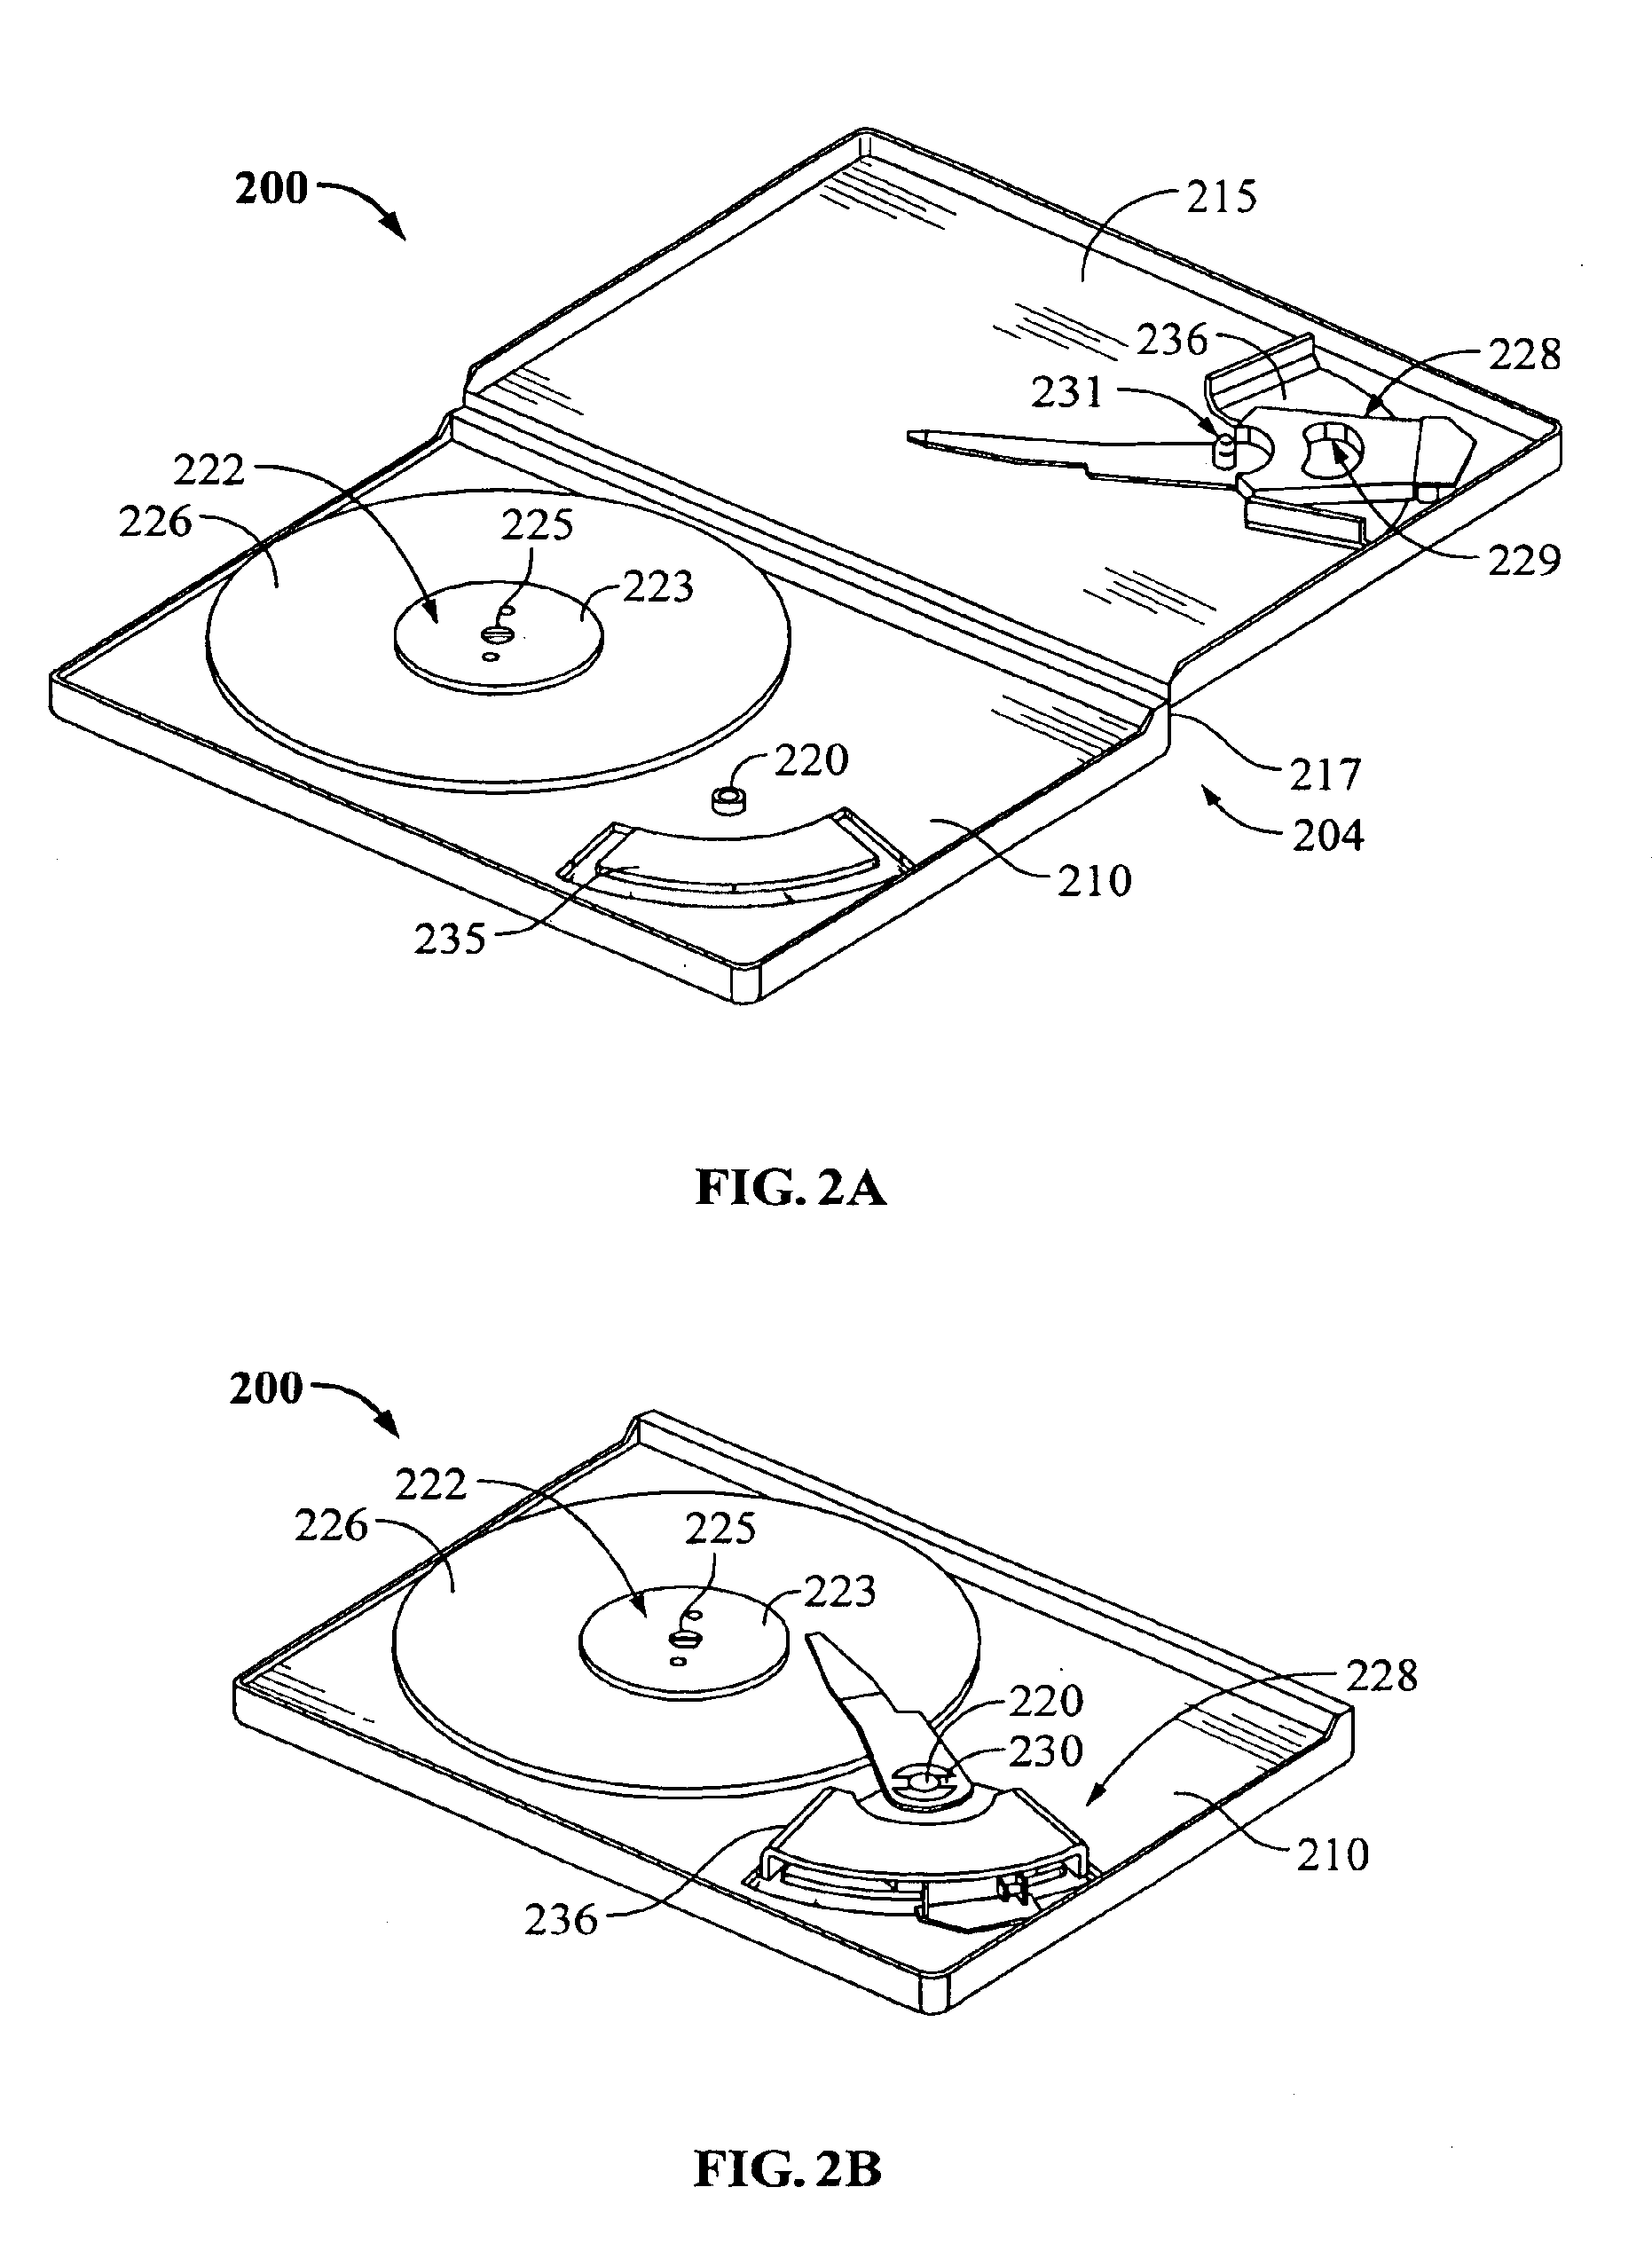 Disk drive having a head disk assembly enclosure including insert molded components